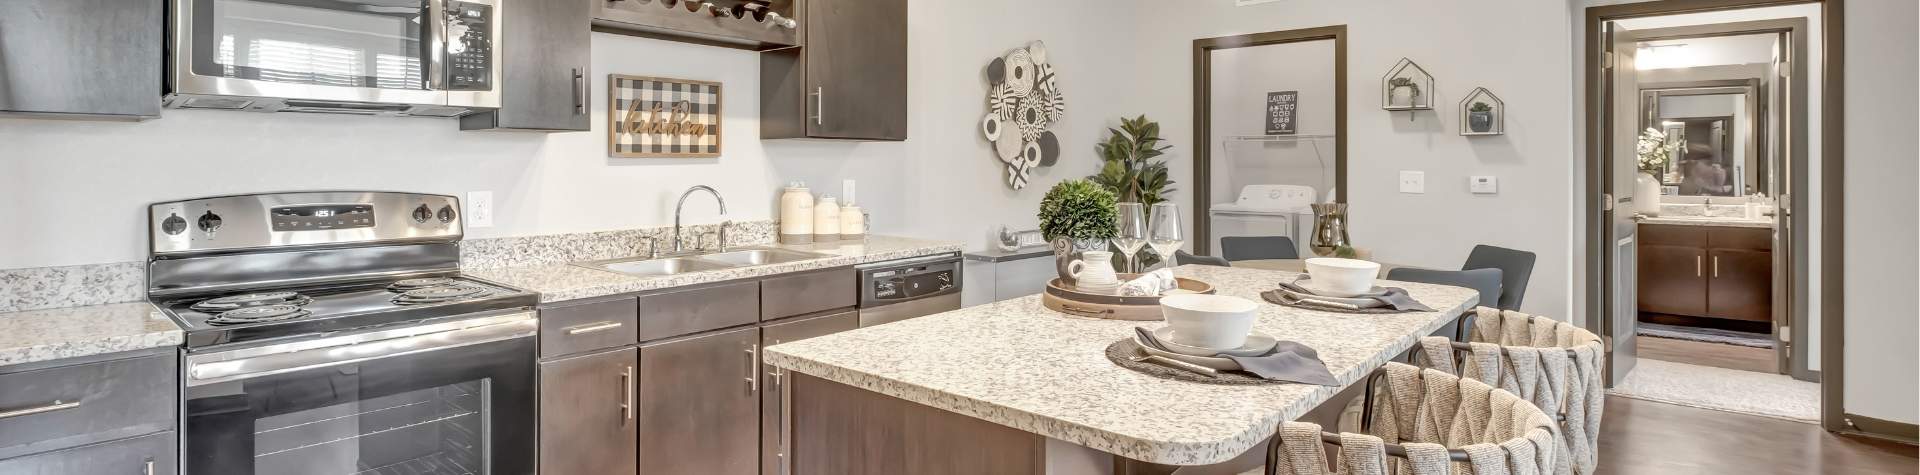 Luxury kitchen at Springs at La Grange featuring granite counter tops and premium finishes.